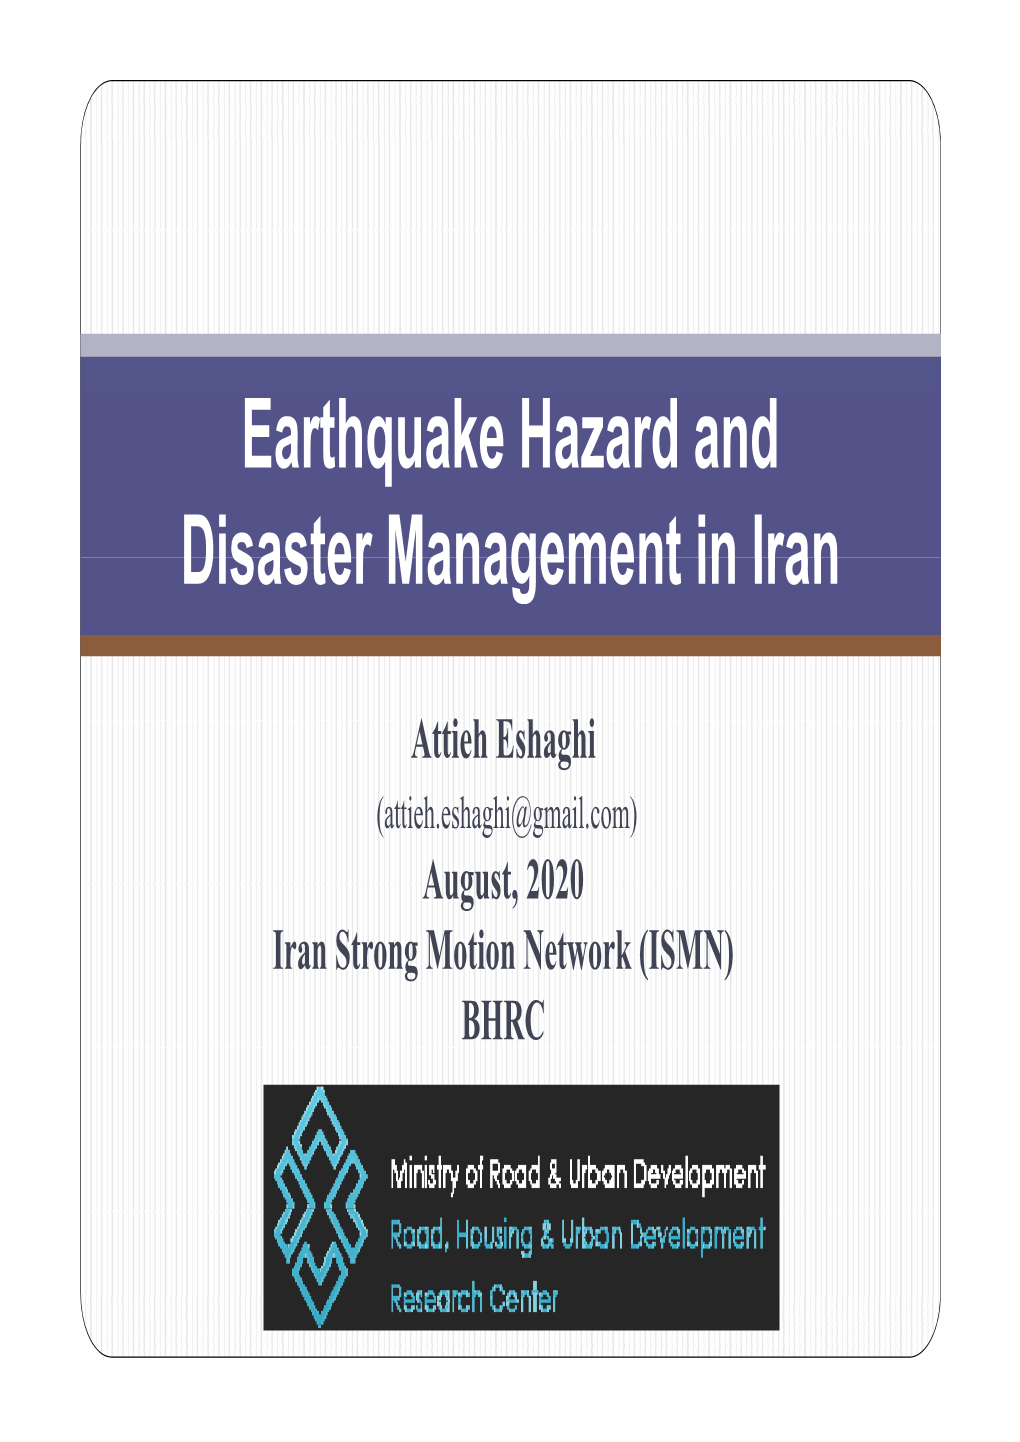 Earthquake Hazard and Disaster Management in Iran